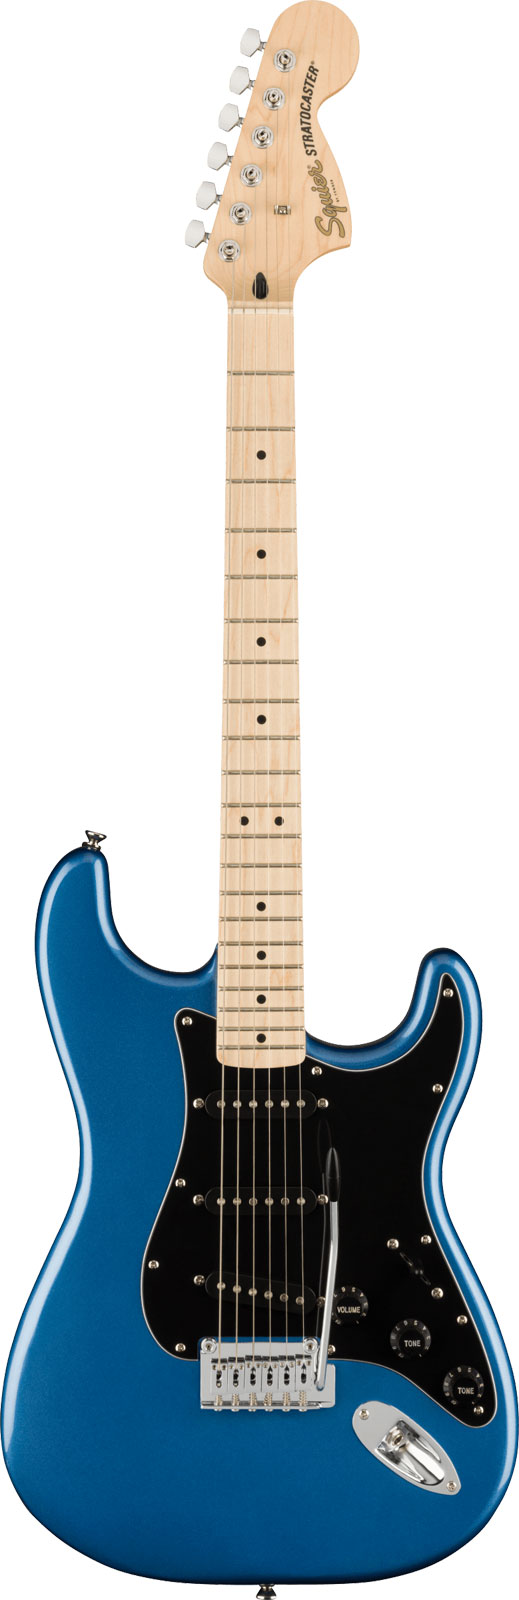 SQUIER STRATOCASTER AFFINITY MN LAKE PLACID BLUE